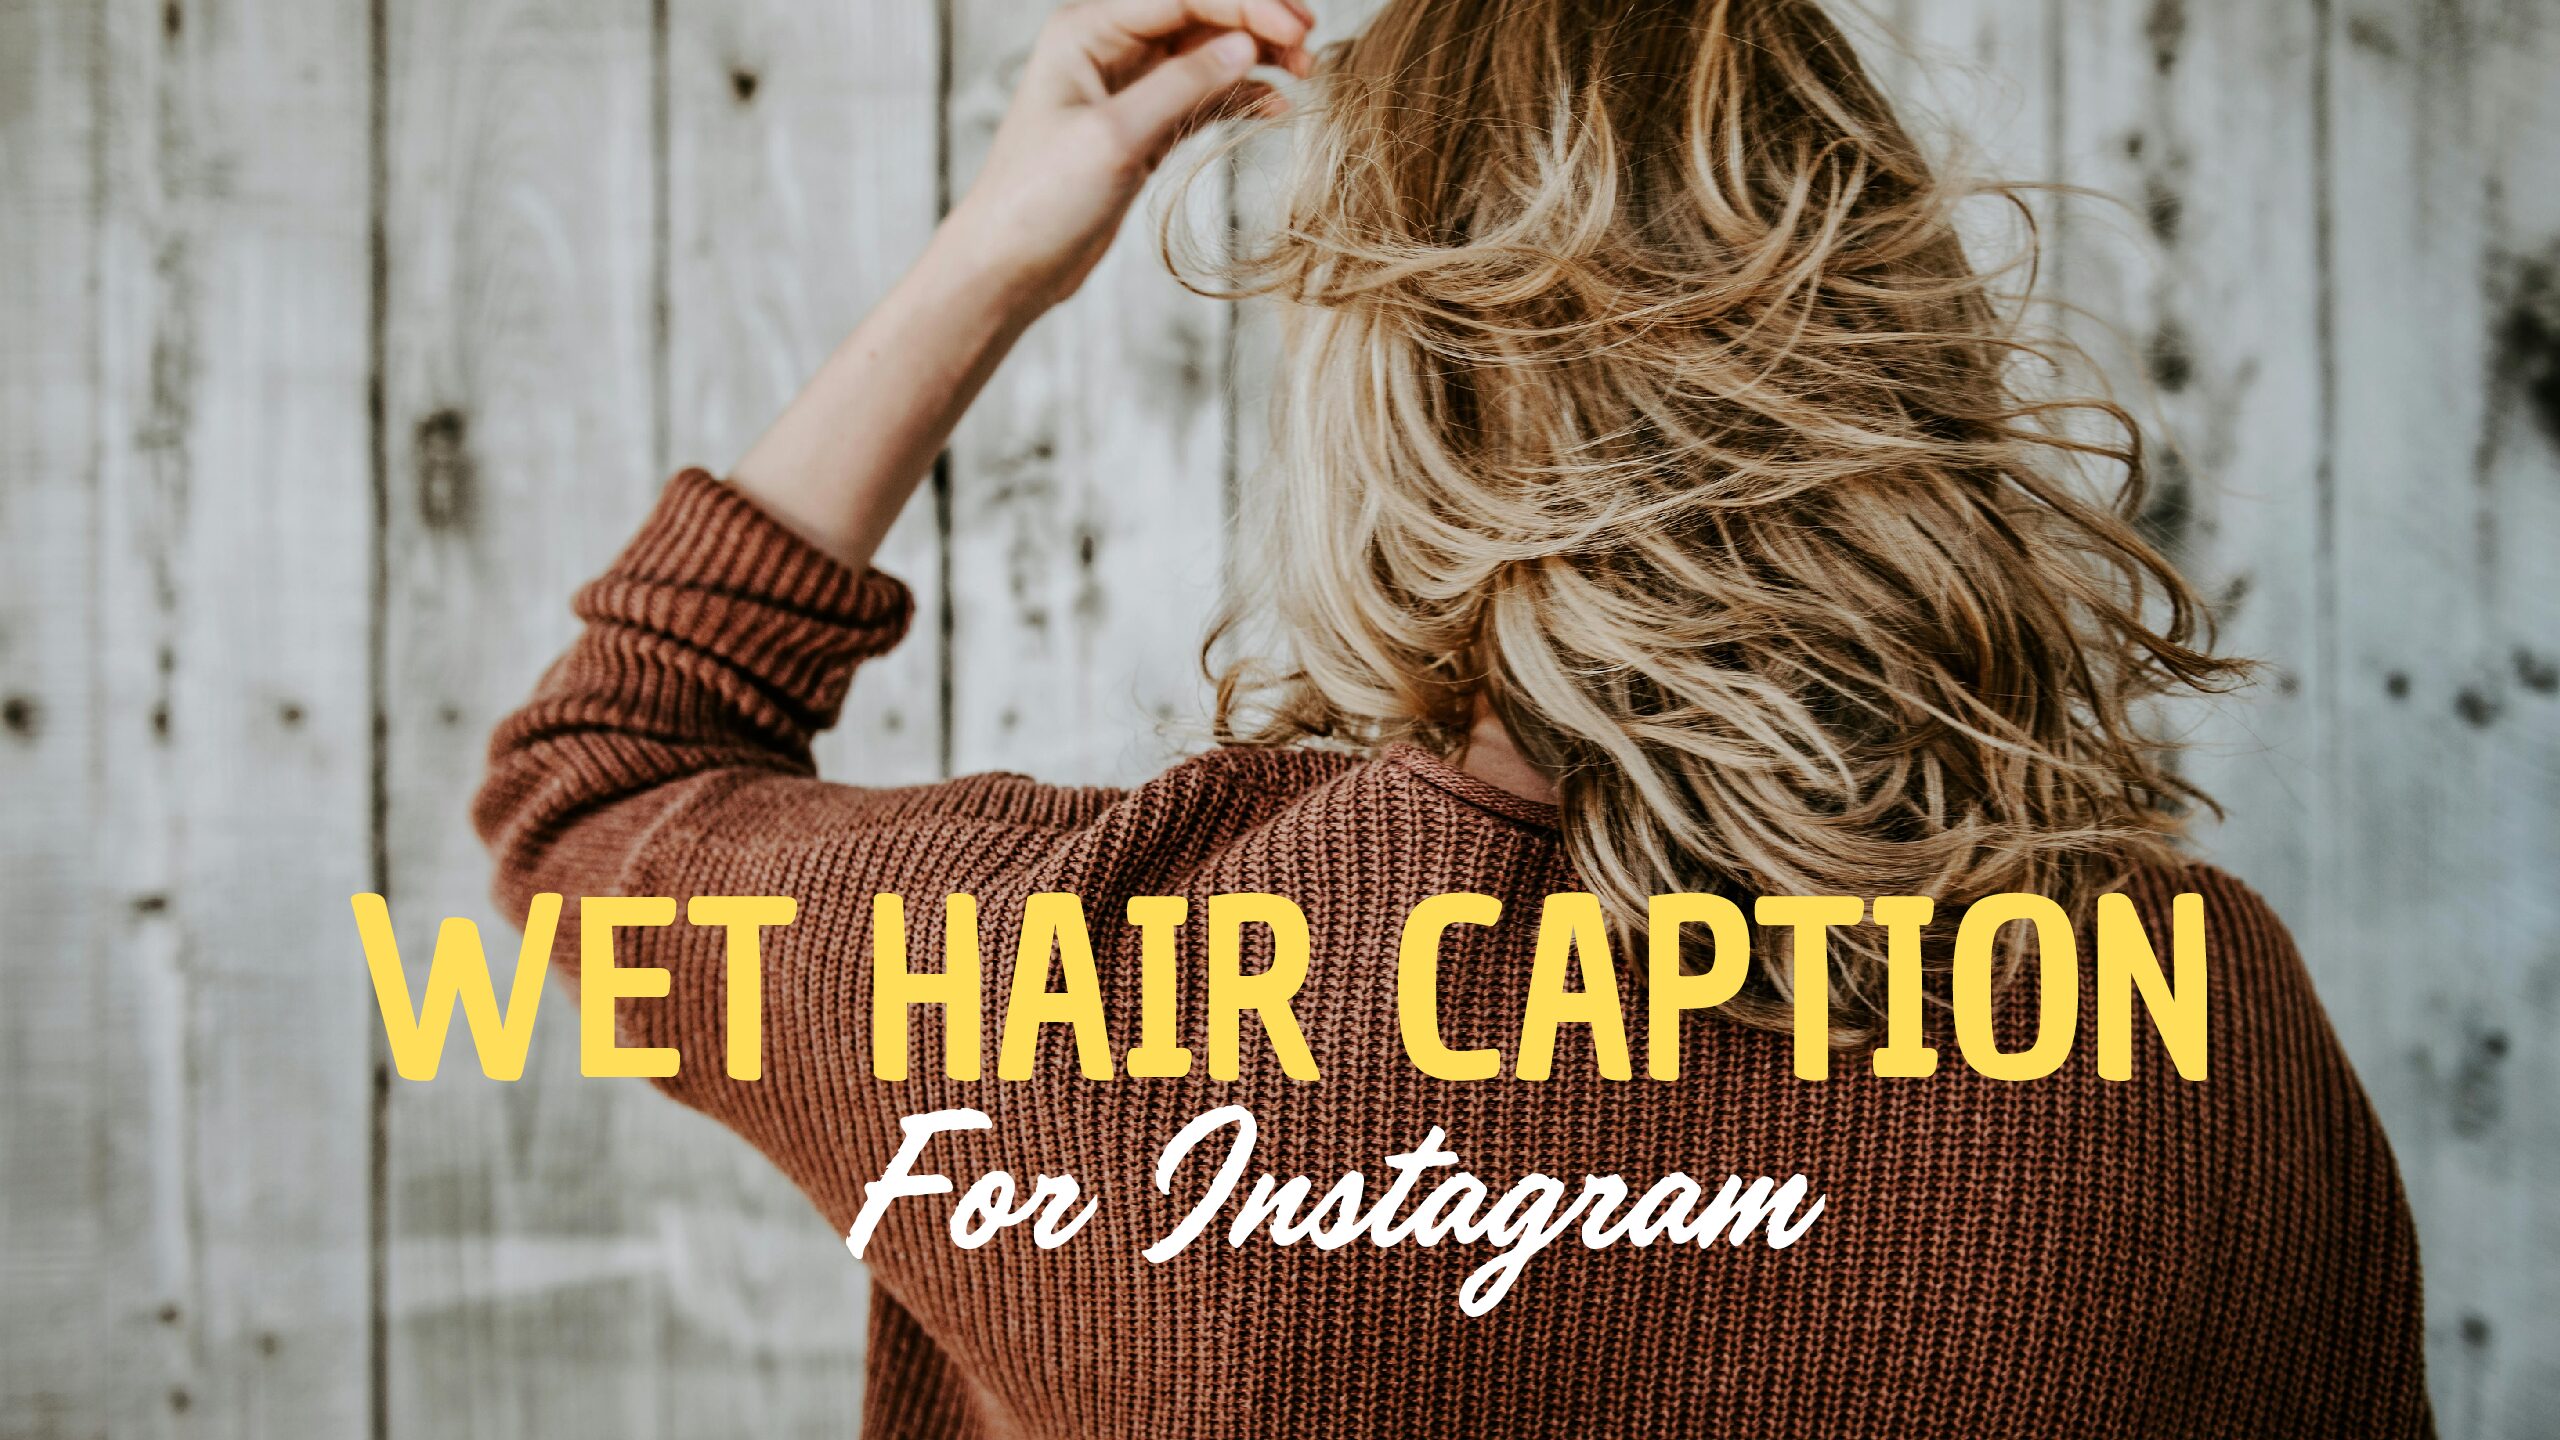 Trendy Instagram Captions For Wet Hair | Showcase your Simplicity